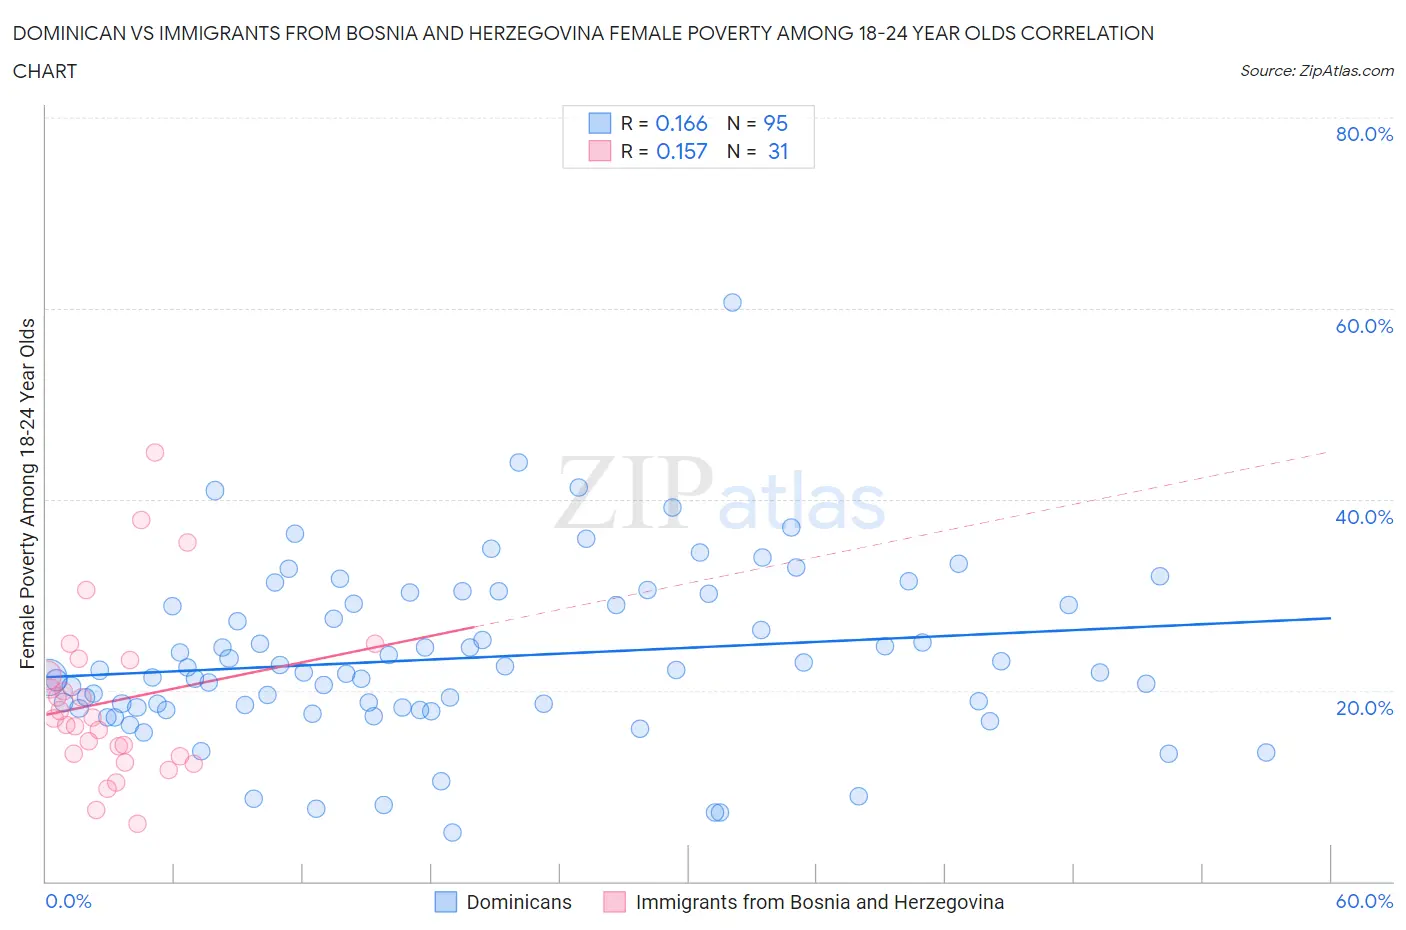 Dominican vs Immigrants from Bosnia and Herzegovina Female Poverty Among 18-24 Year Olds